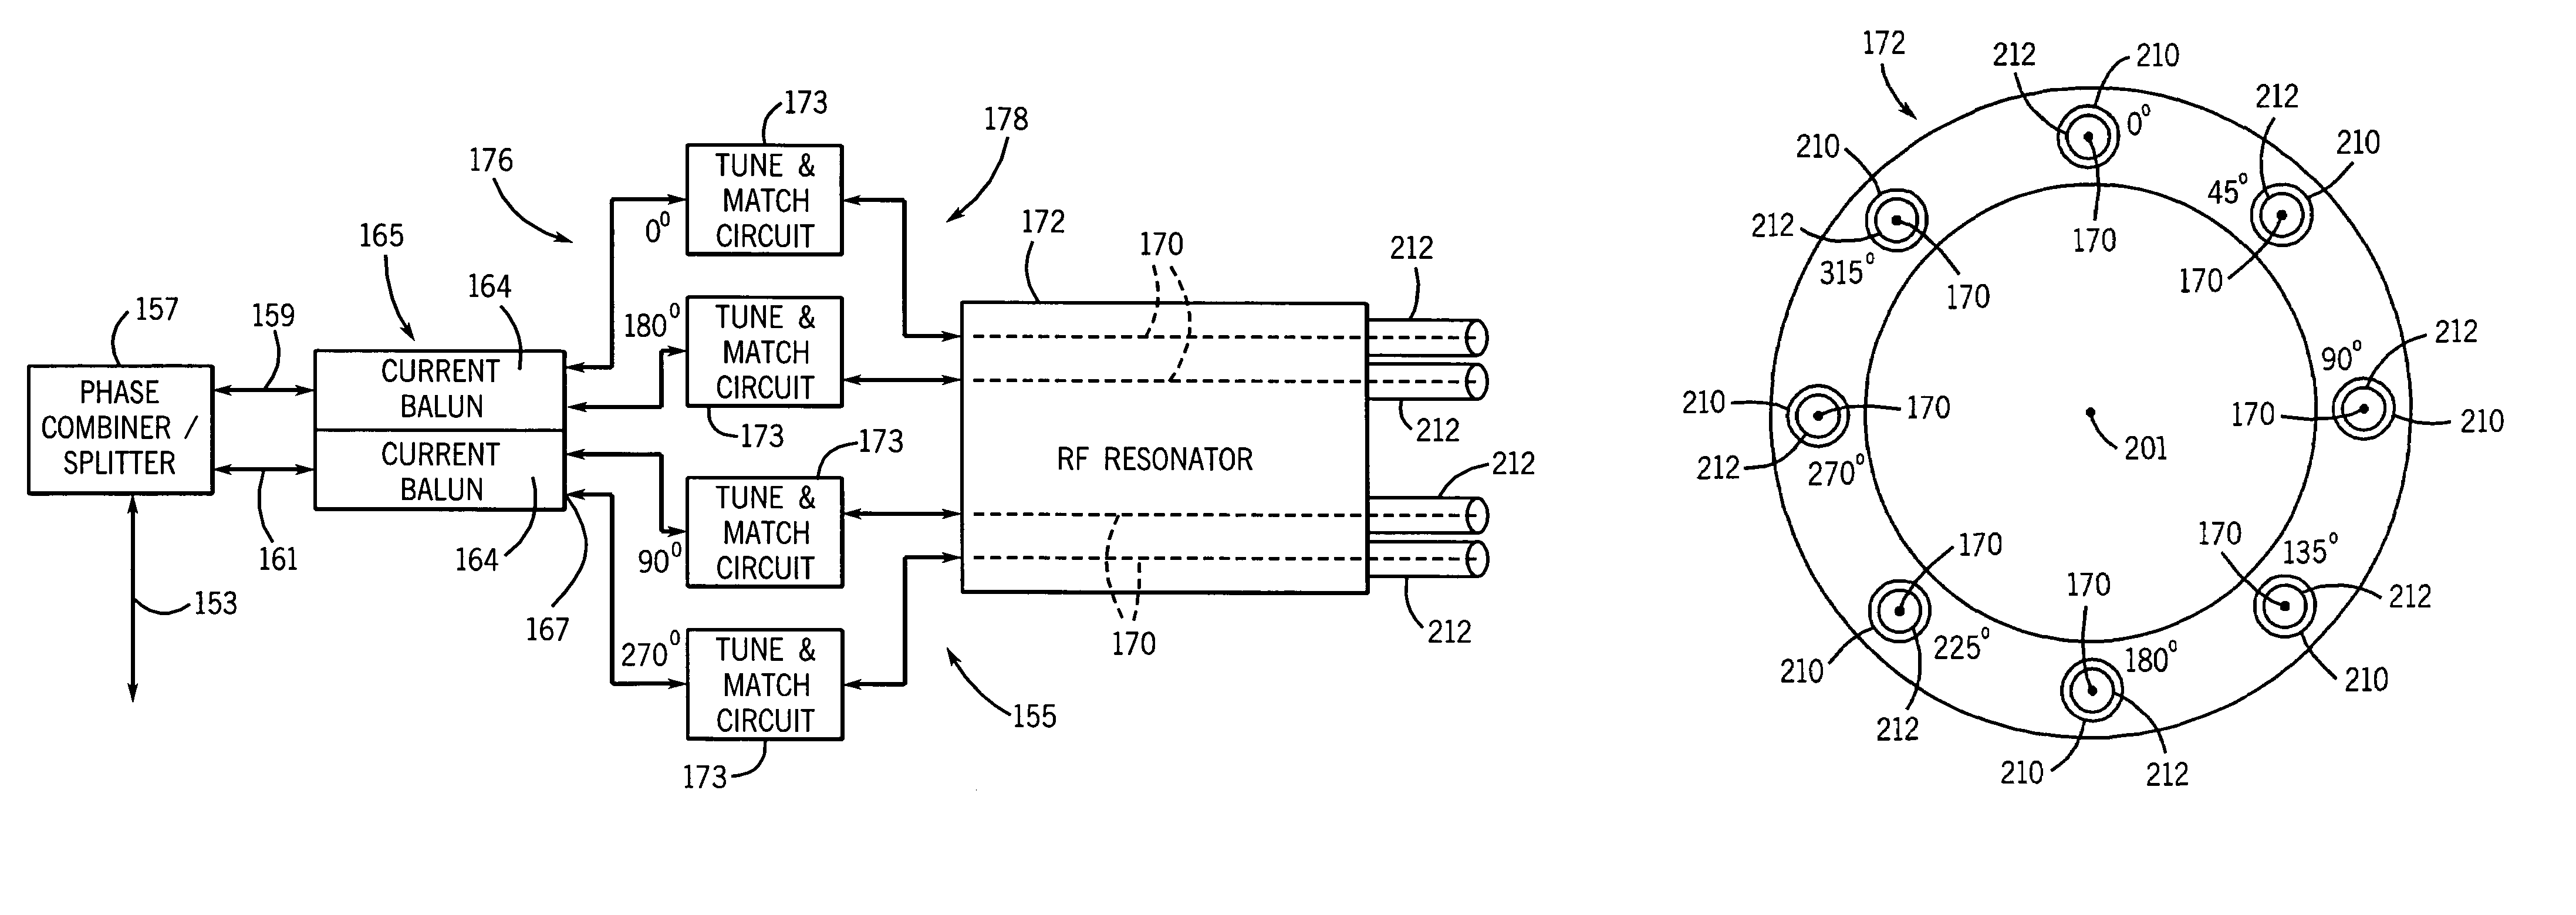 RF coil assembly for magnetic resonance imaging and spectroscopy systems